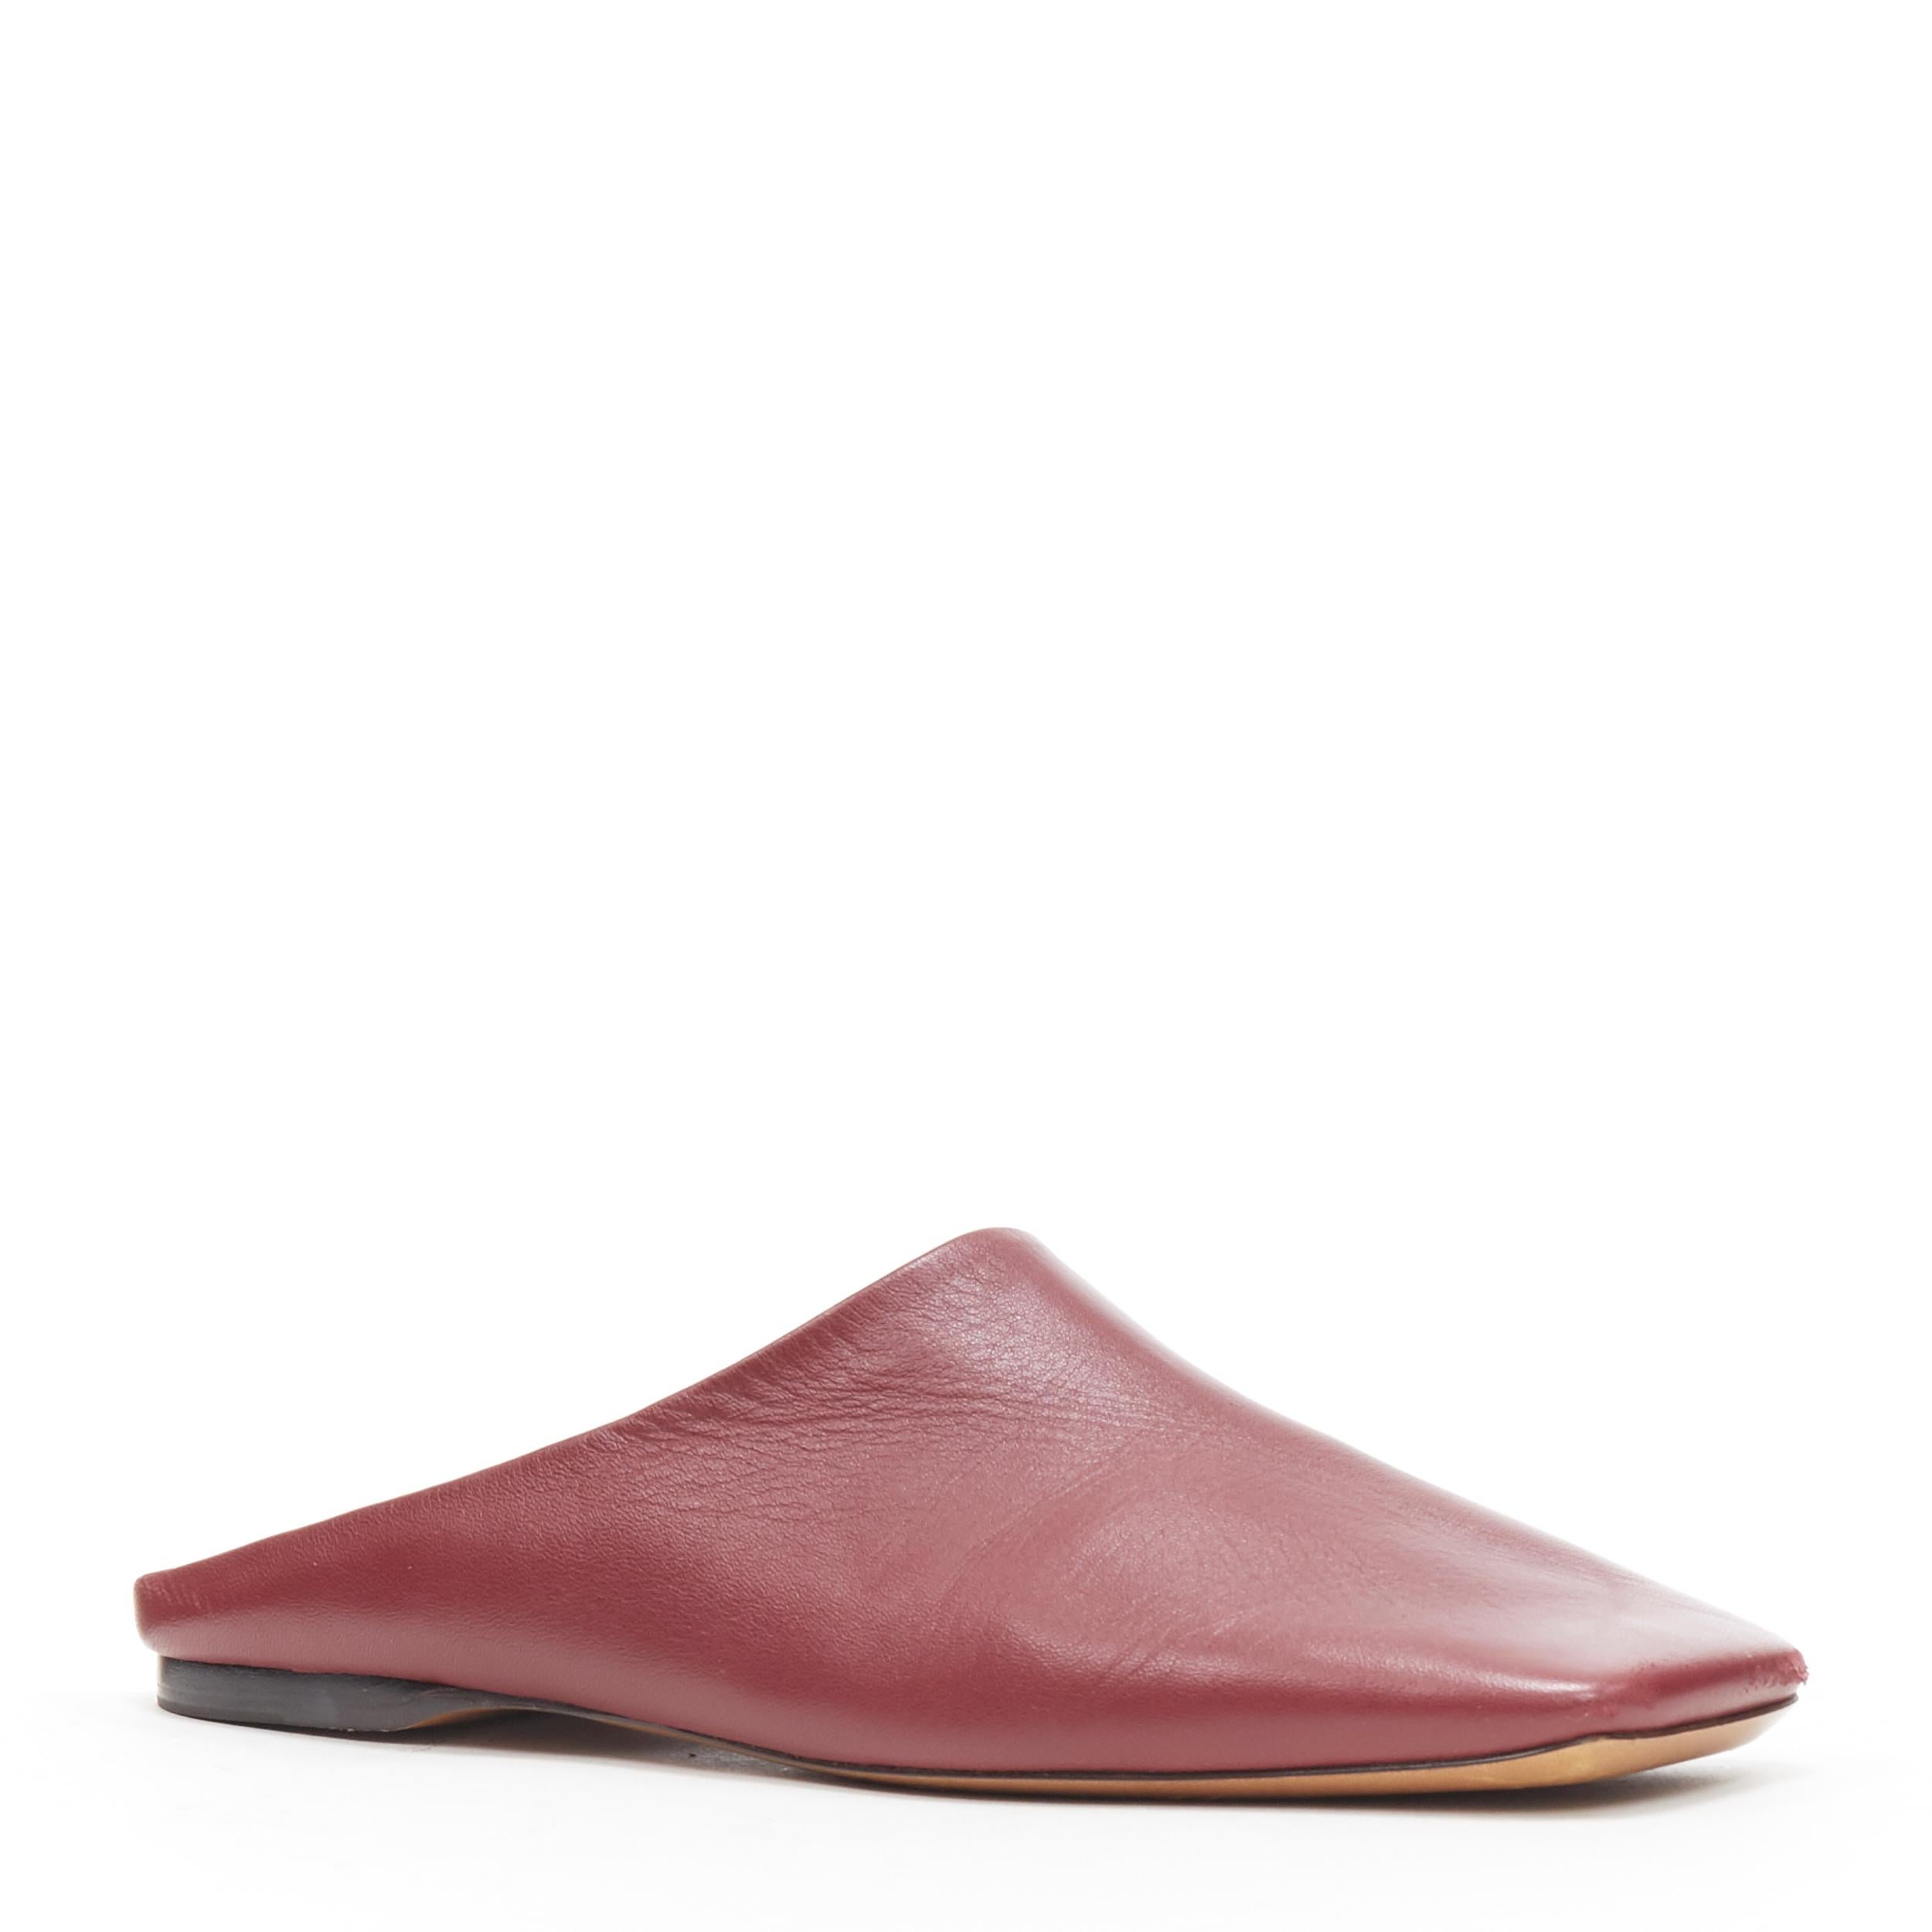 OLD CELINE PHOEBE PHILO burgundy red square toe babouche moccasin flats EU37.5 
Reference: LNKO/A01670 
Brand: Celine 
Designer: Phoebe Philo 
Model: Babouche 
Material: Leather 
Color: Burgundy 
Pattern: Solid 
Extra Detail: Square toe. Slip on